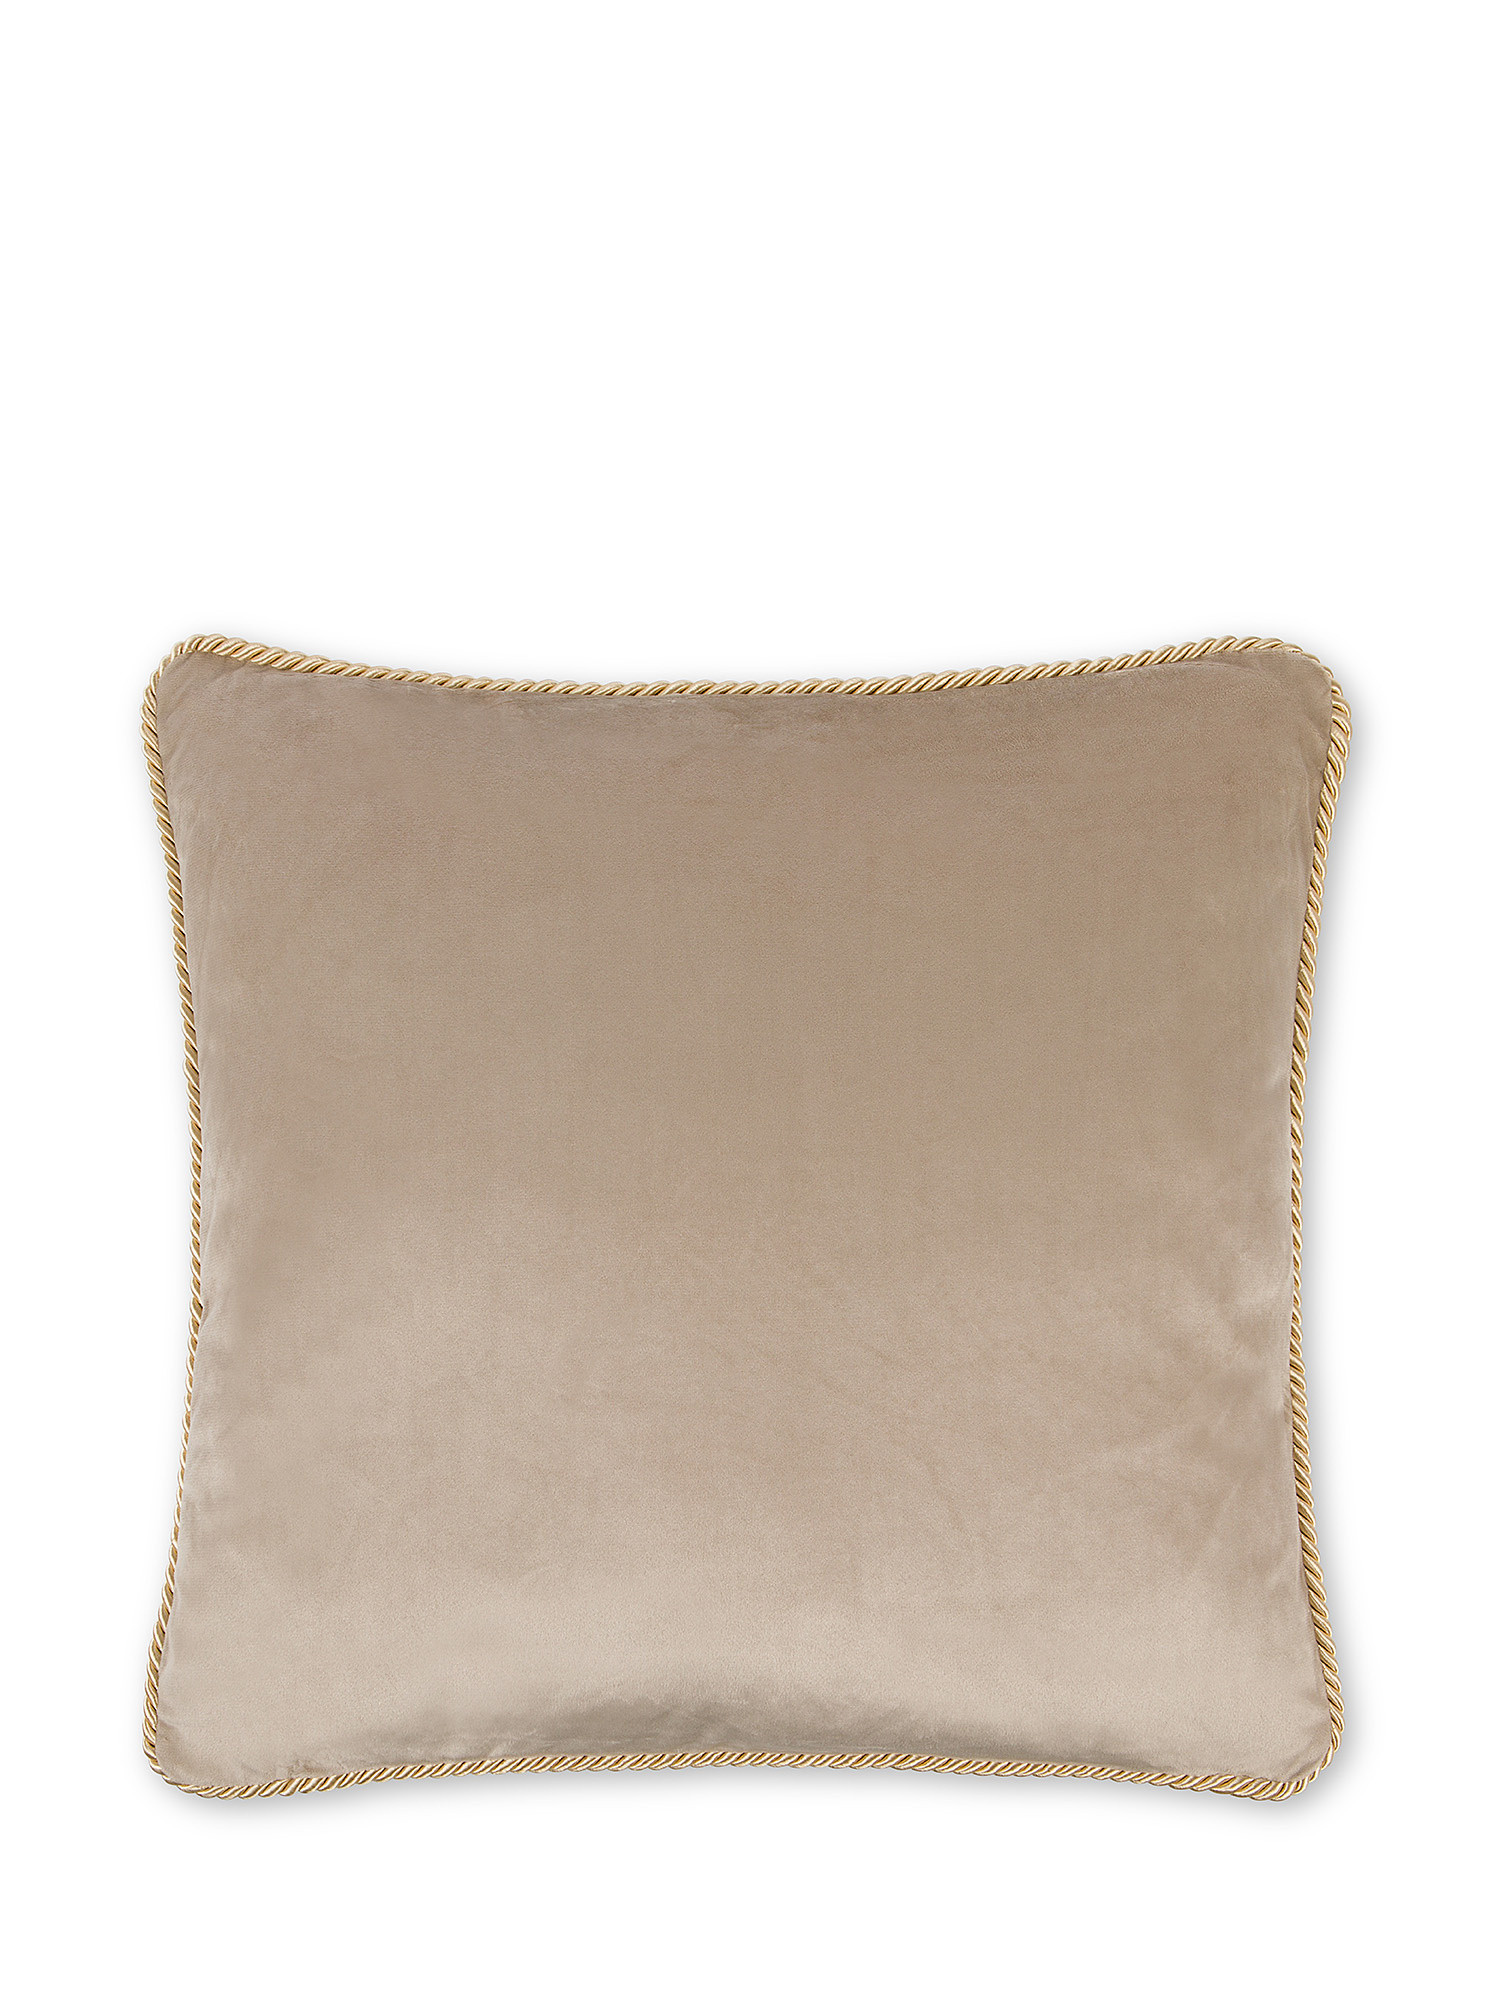 Cuscino in velluto 45x45 cm, Beige, large image number 0